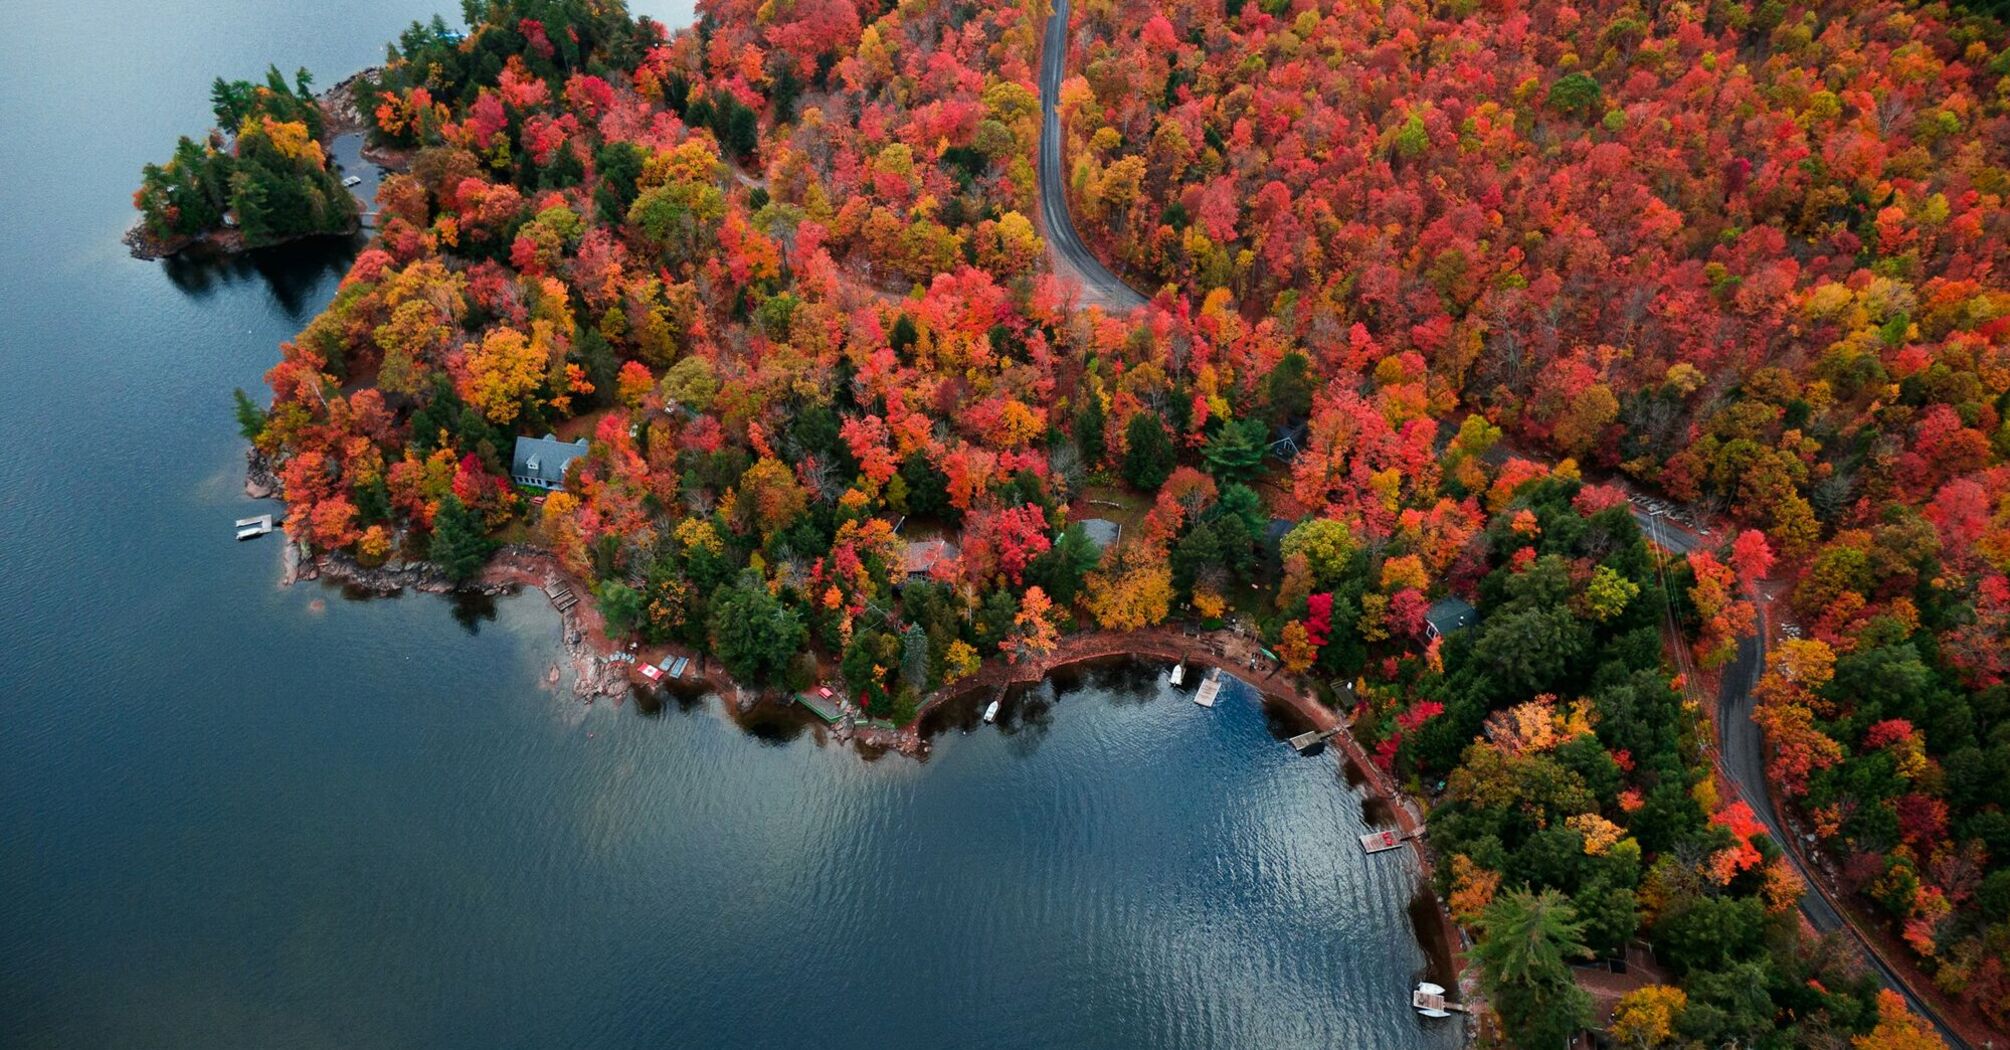 Aerial view of Ontario's autumnal foliage by a lake